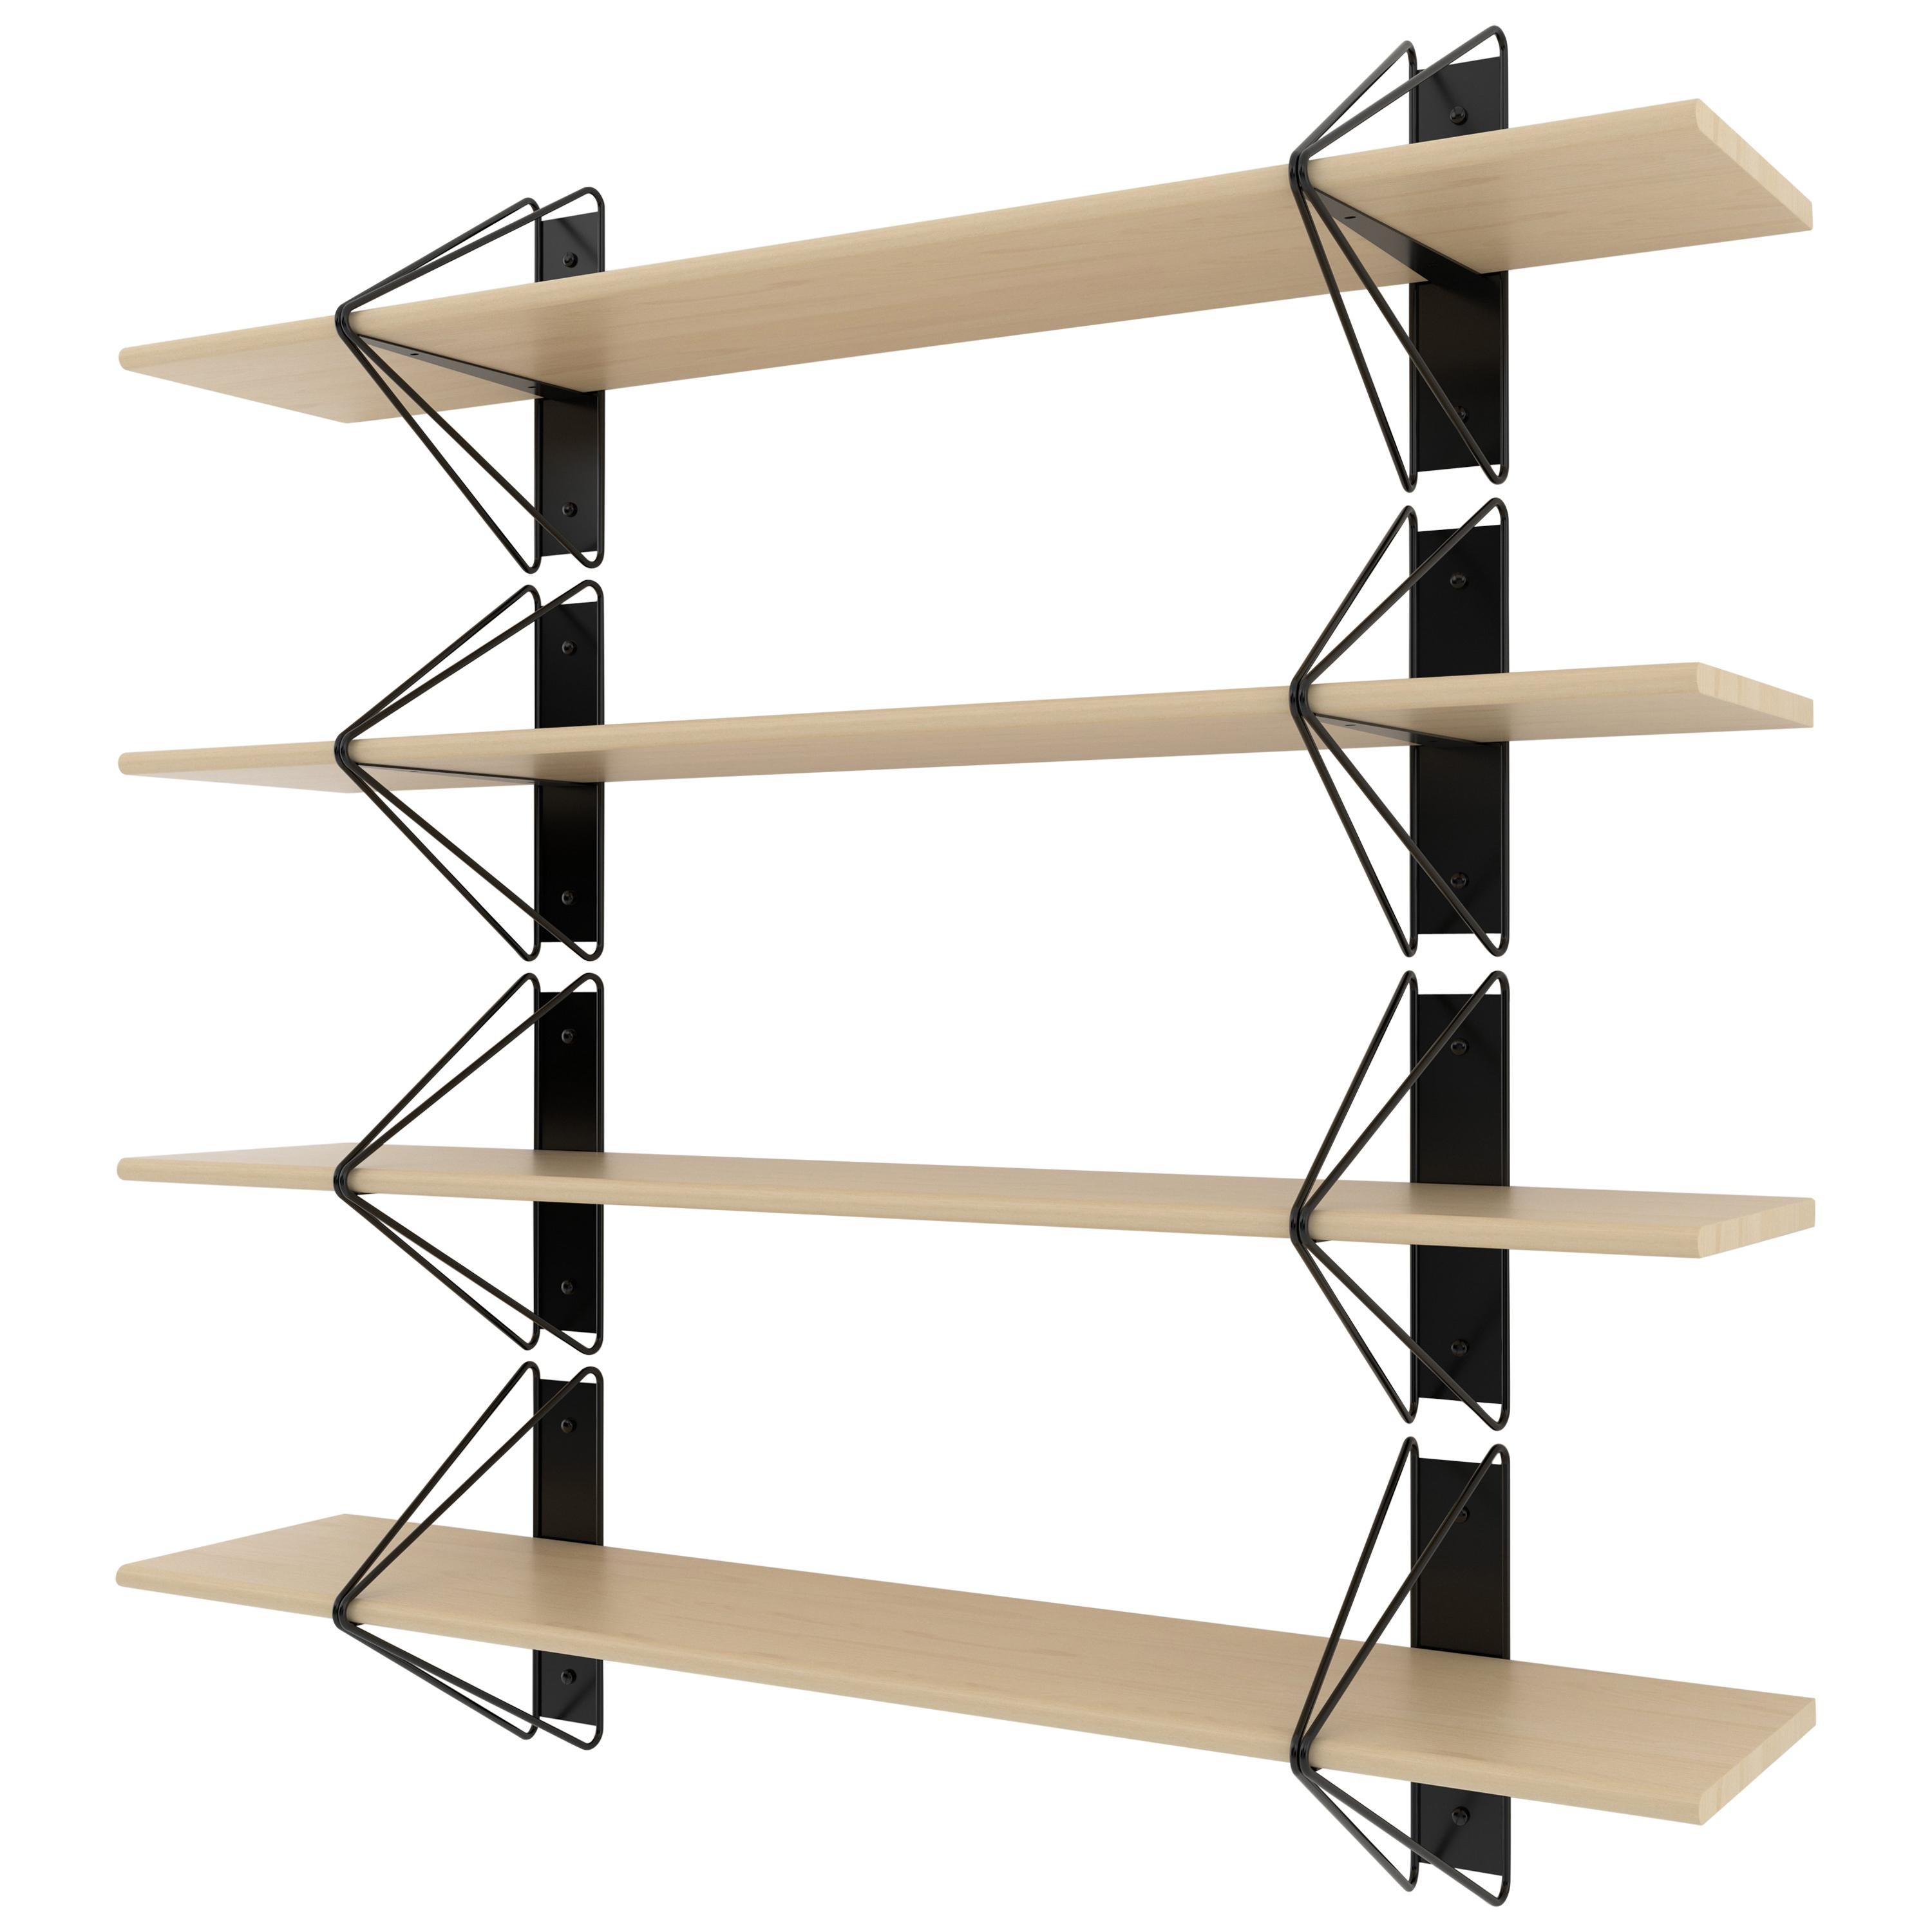 American Set of 3 Strut Shelves from Souda, Black, Made to Order For Sale